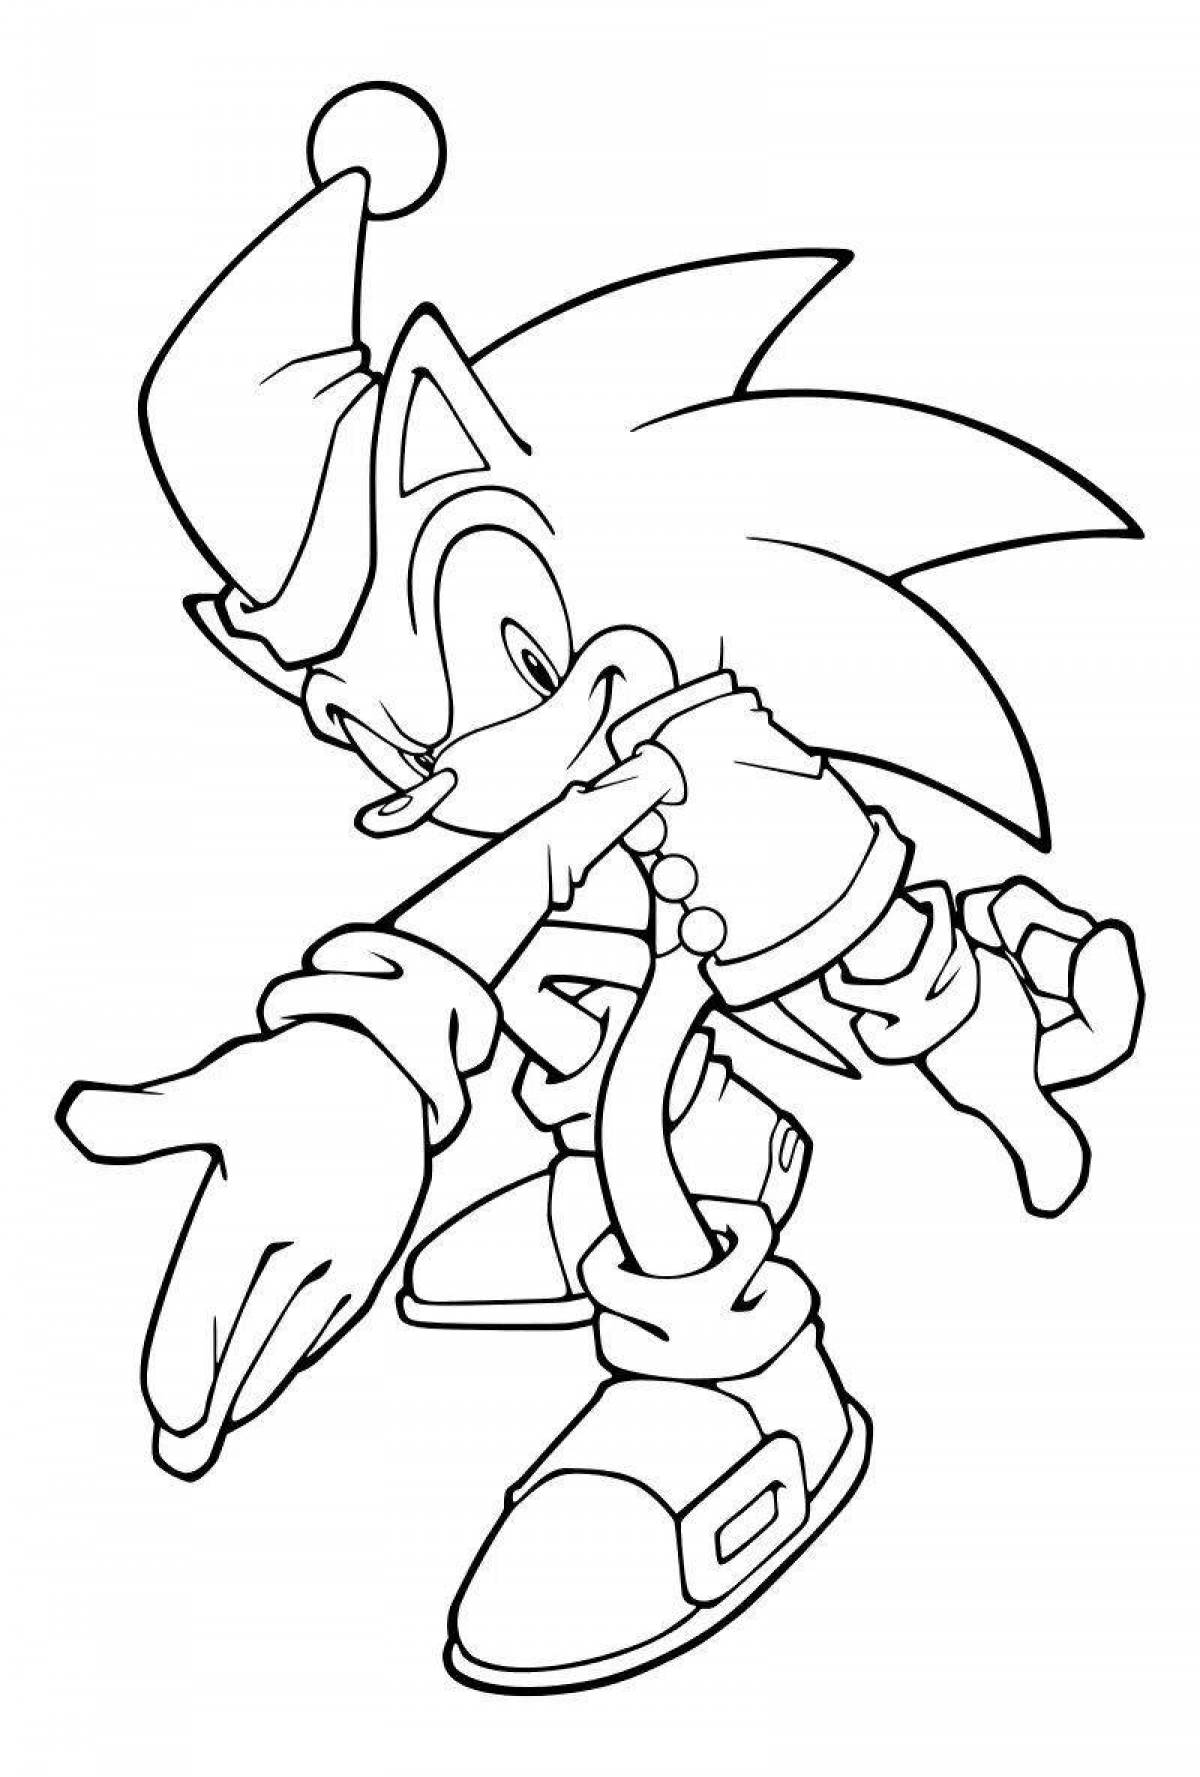 Attractive sonic god coloring book